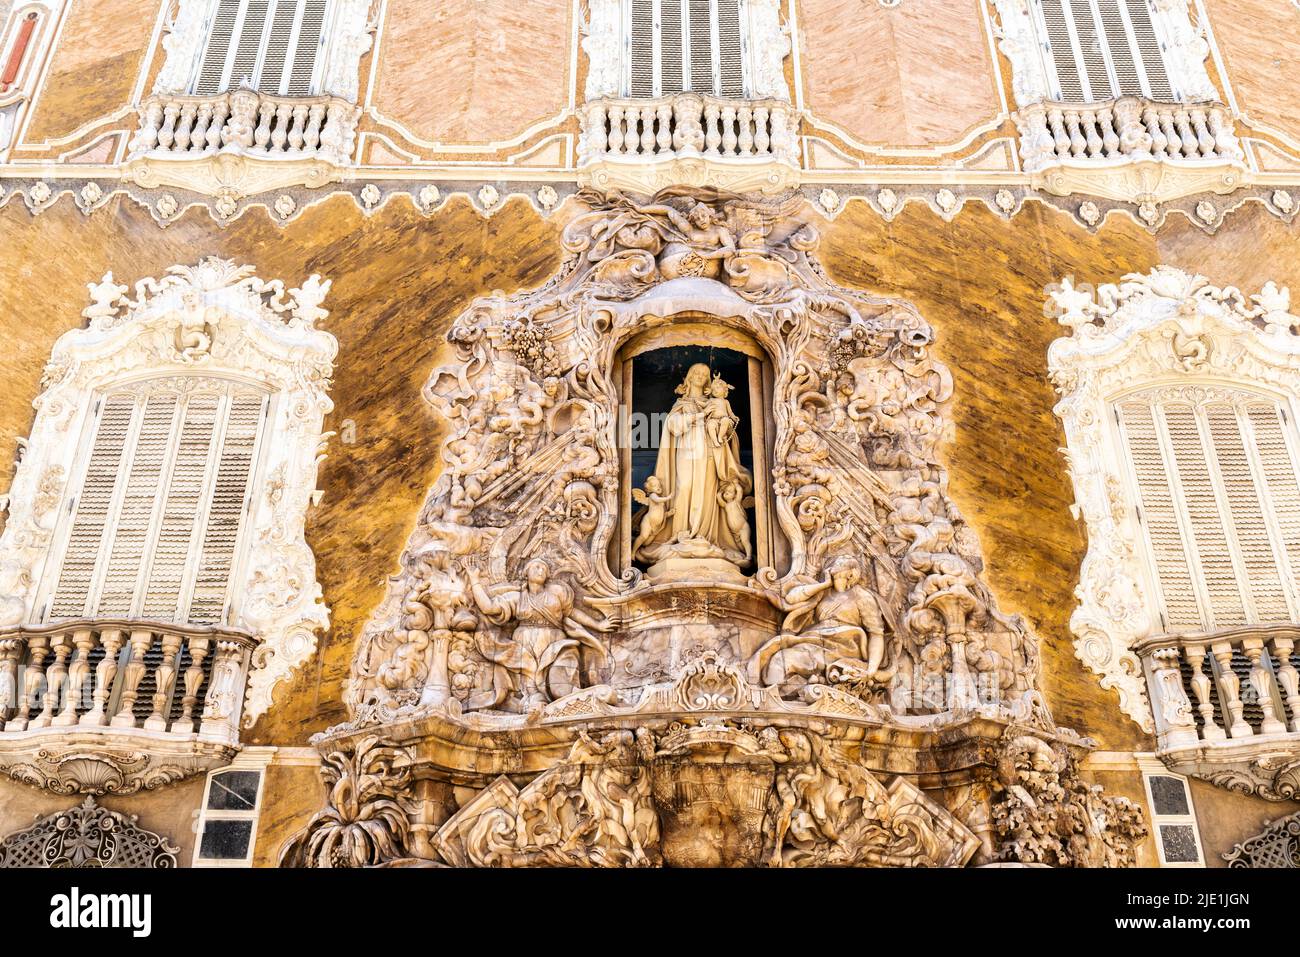 The very ornate outside of the Ceramics Museum in Valencia, Spain Stock Photo